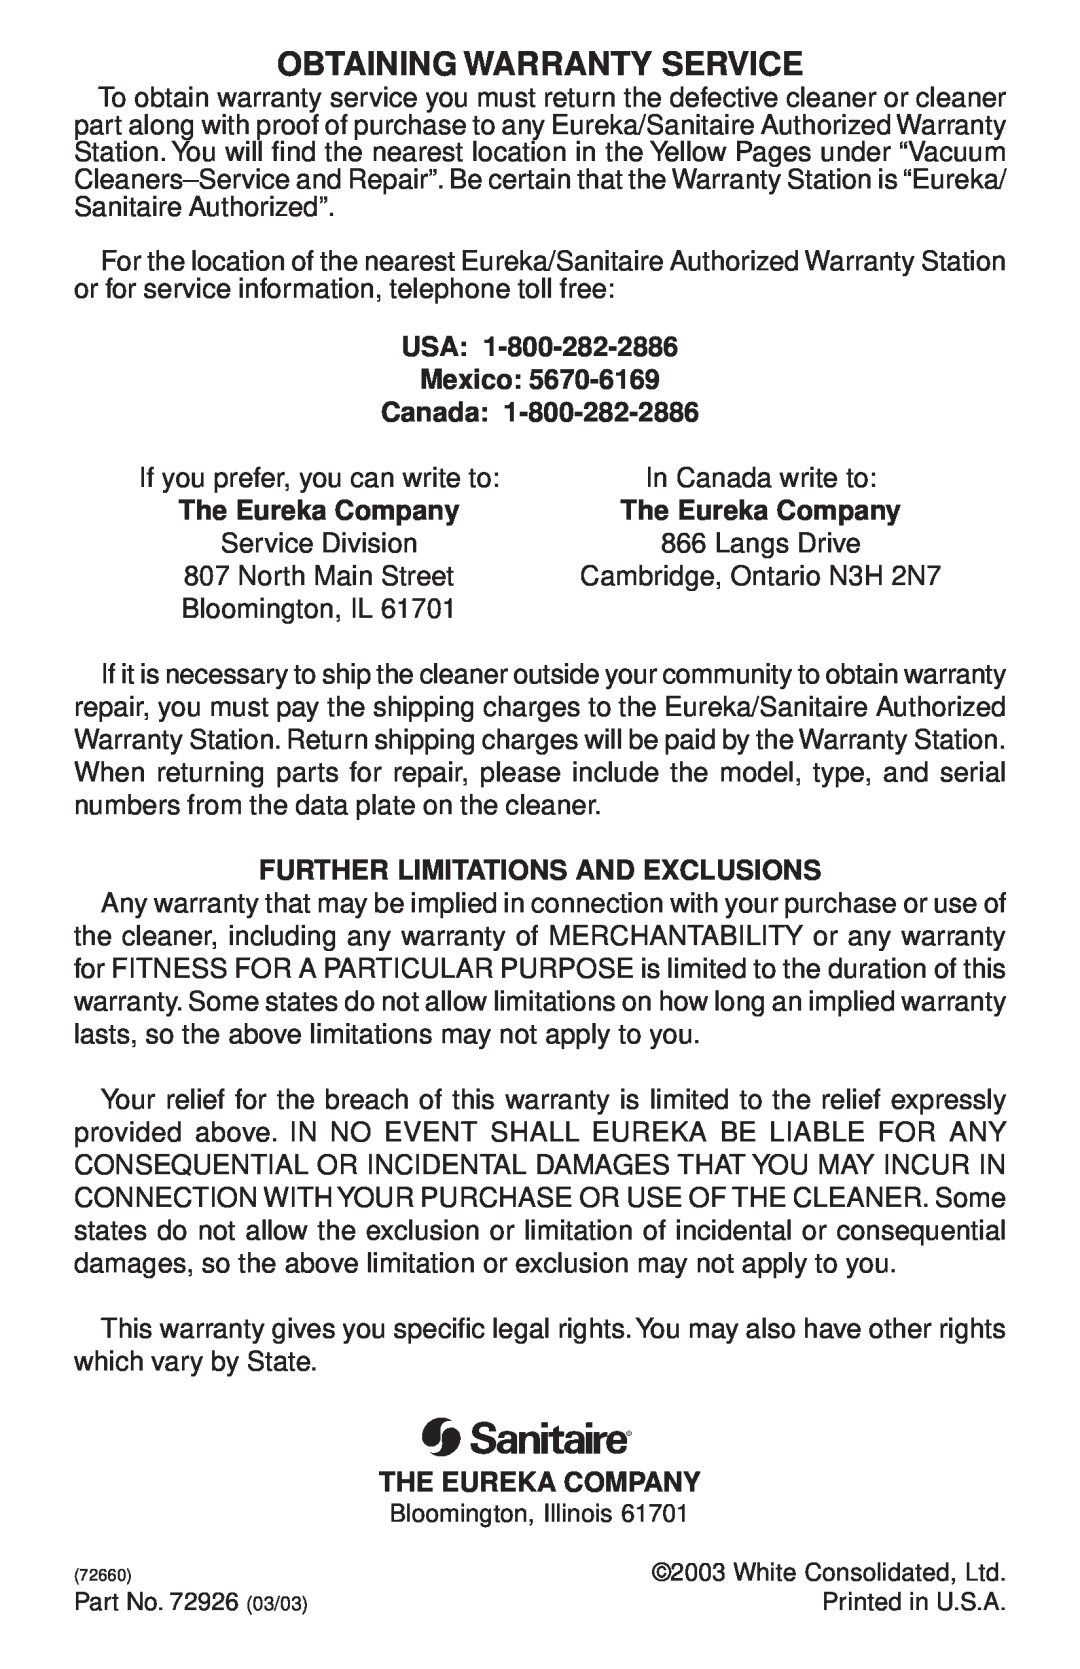 Sanitaire 680 Series Obtaining Warranty Service, USA Mexico Canada, The Eureka Company, Further Limitations And Exclusions 